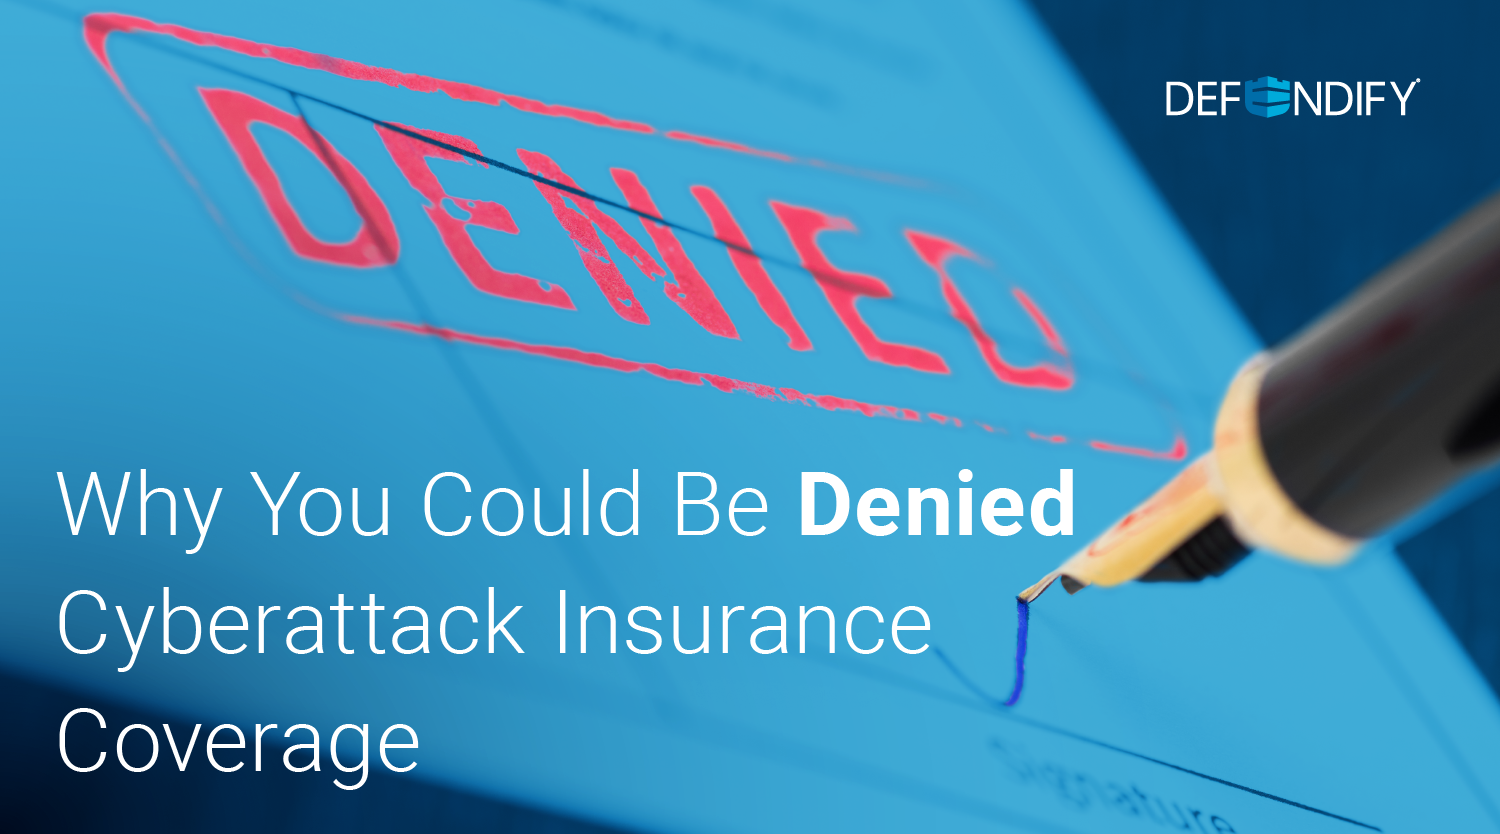 Why You Could Be Denied Cyberattack Insurance Coverage